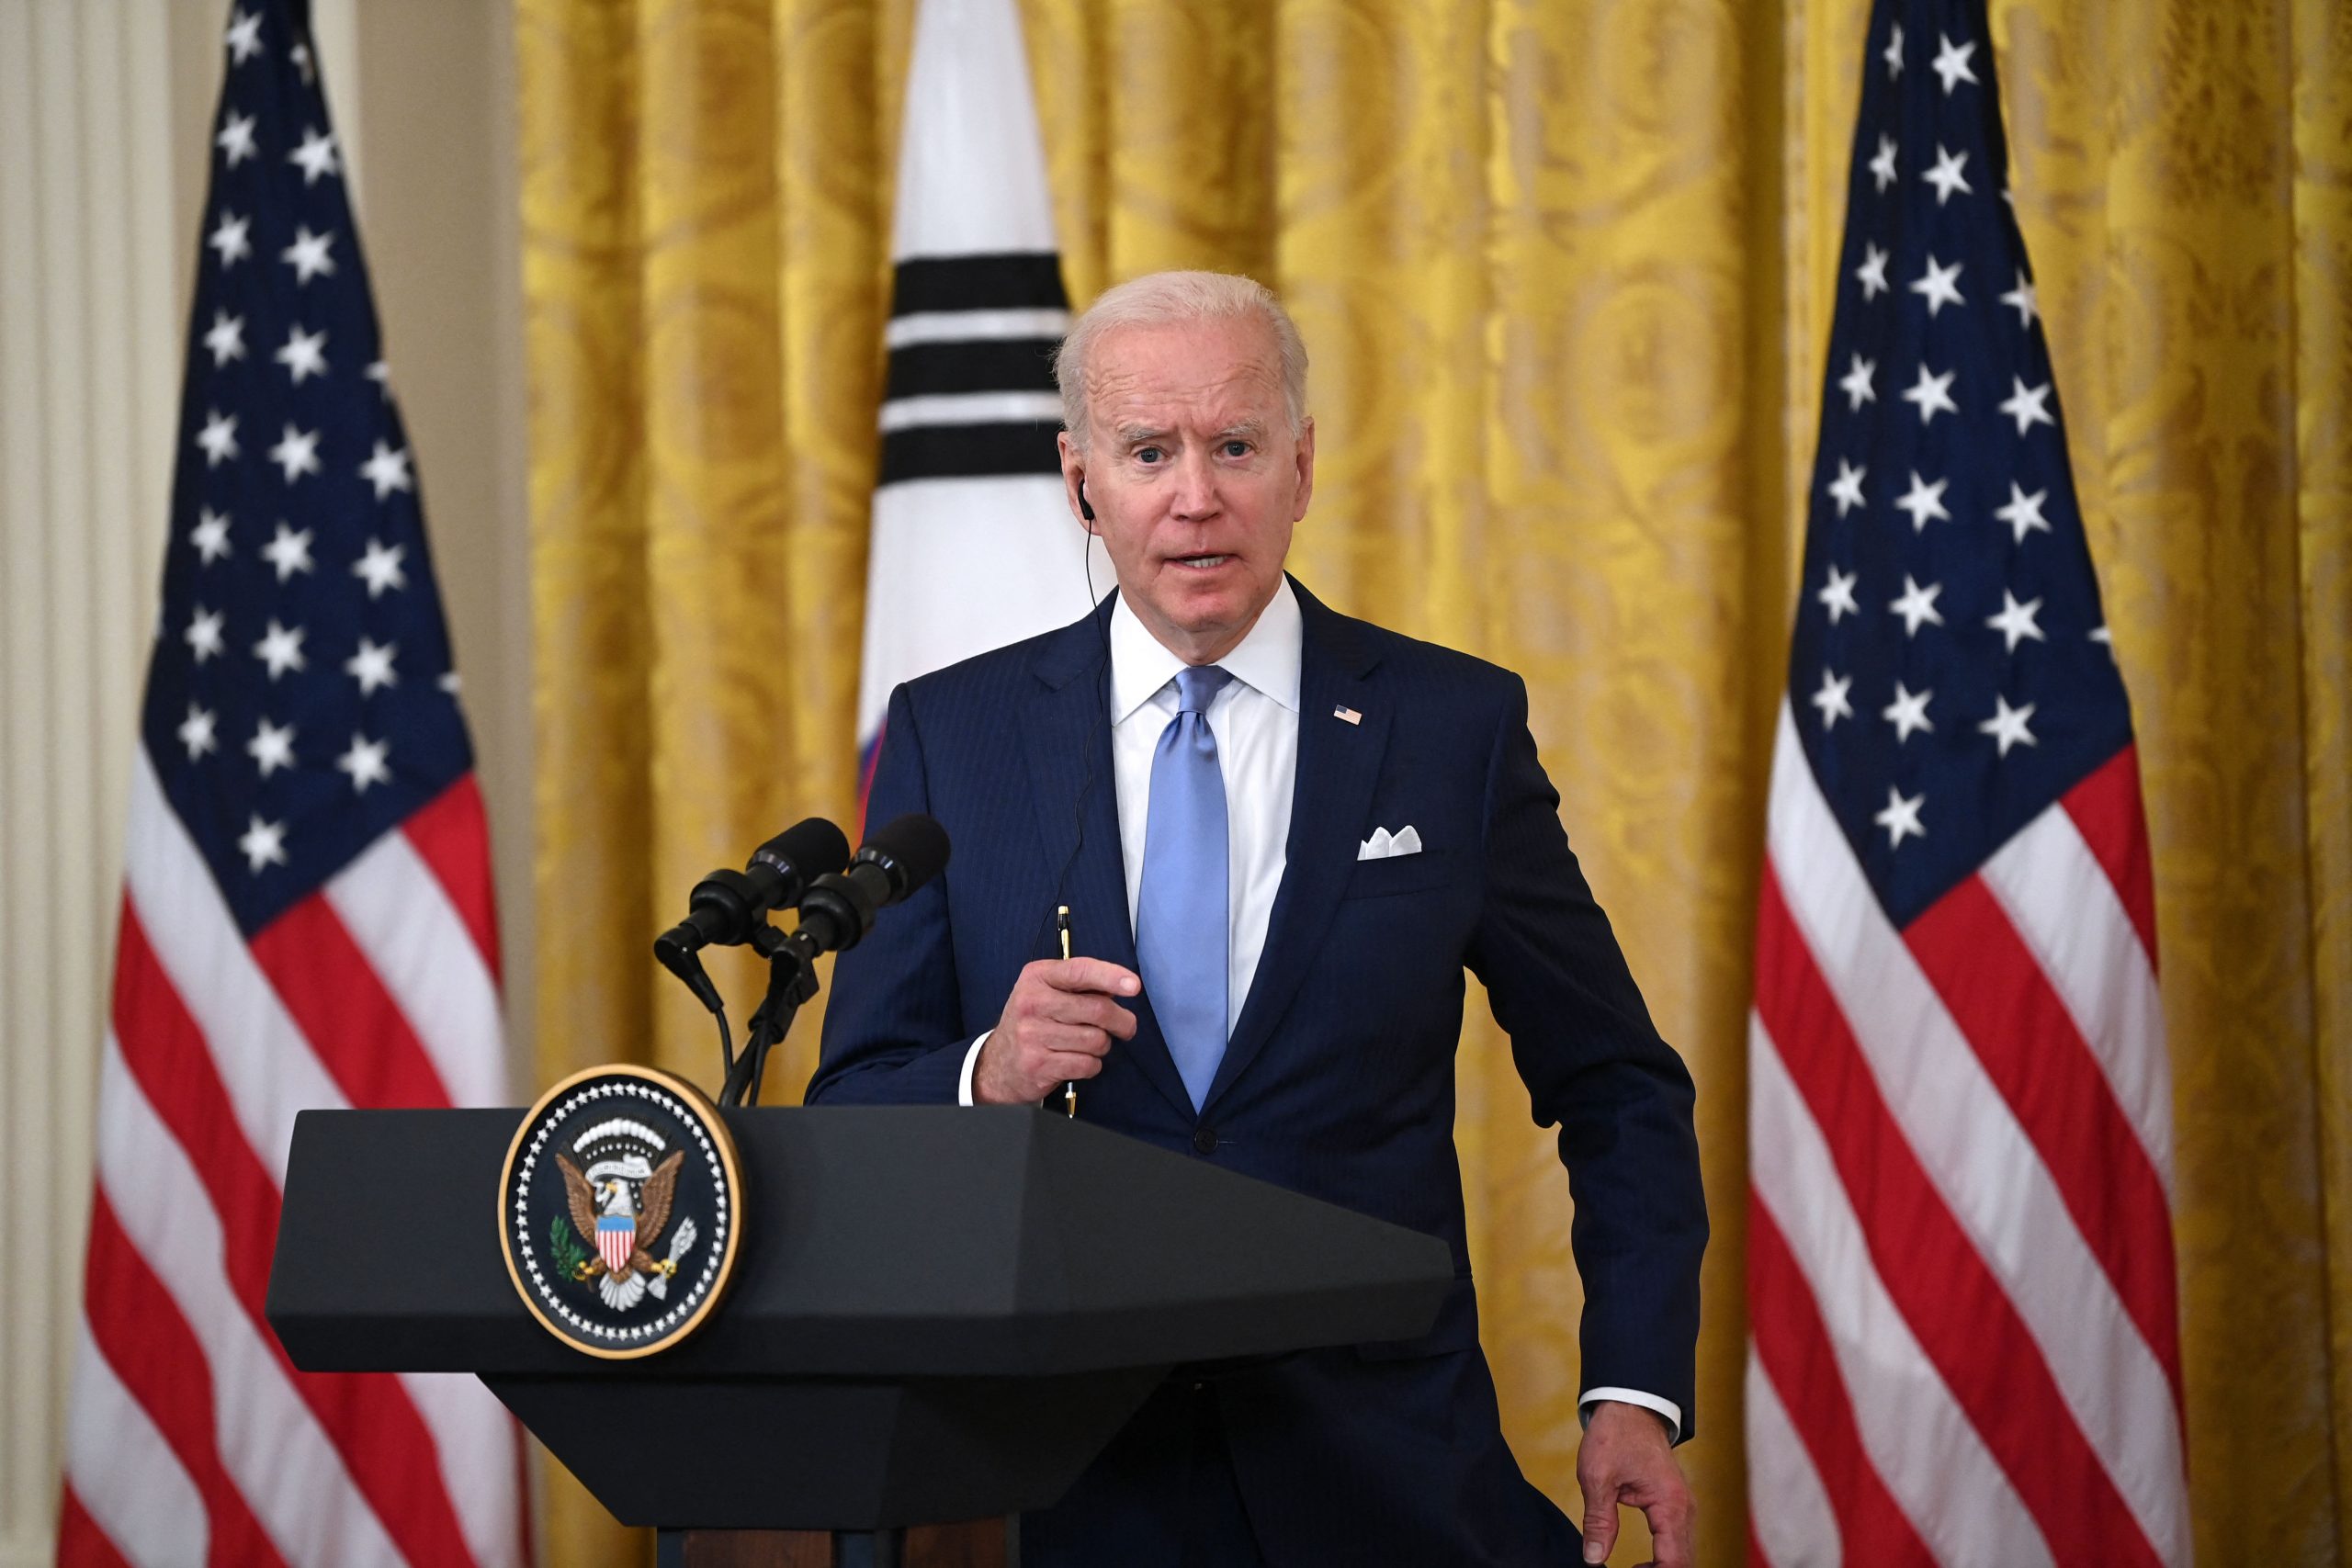 Joe Biden criticises DACA’s suspension as ‘deeply disappointing’, pledges appeal